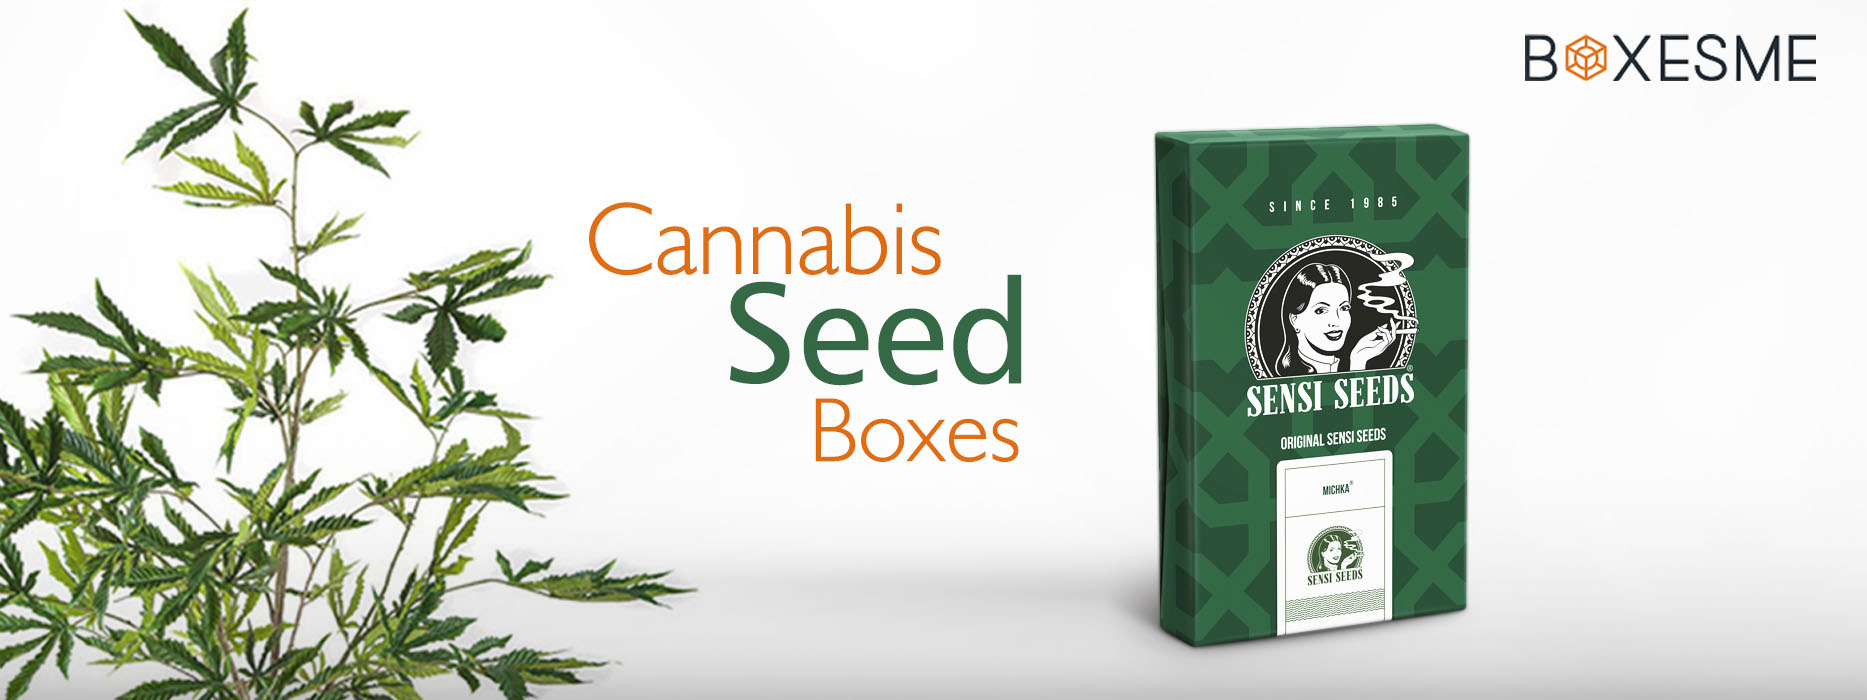 What is the interesting aspect of using Cannabis Packaging